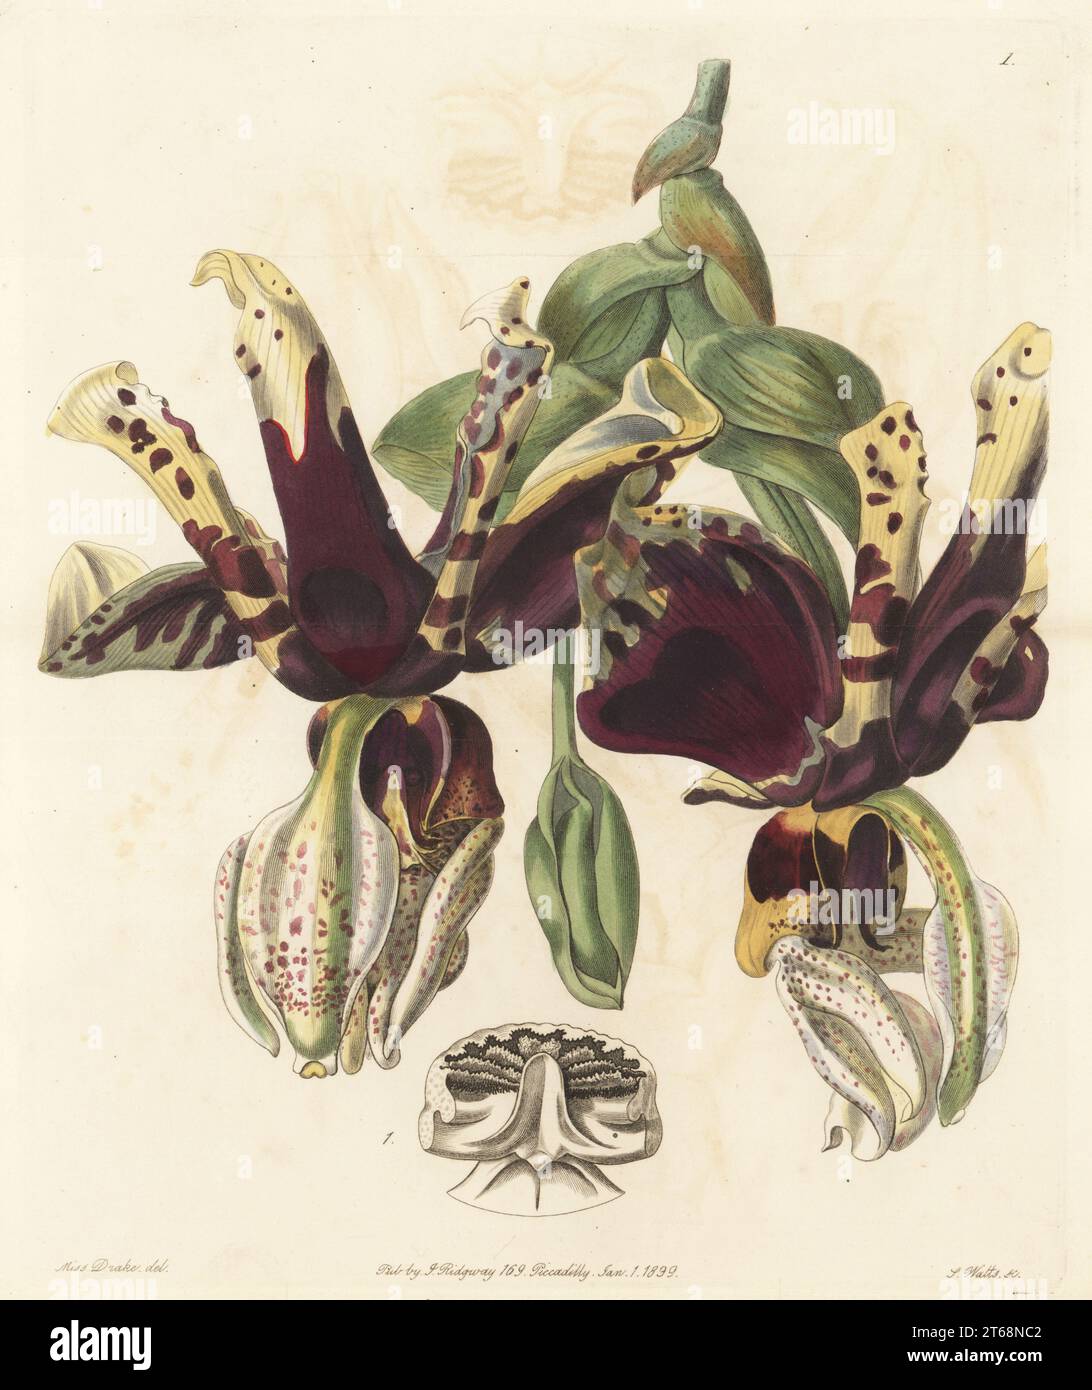 Tiger-flowered stanhopea orchid, Stanhopea tigrina. Native to Mexico, imported from Xalapa, raised by nurseryman William Rollisson of Tooting. Handcoloured copperplate engraving by Stephen Watts after a botanical illustration by Sarah Drake from Edwards Botanical Register, edited by John Lindley, published by James Ridgway, London, 1839. Stock Photo